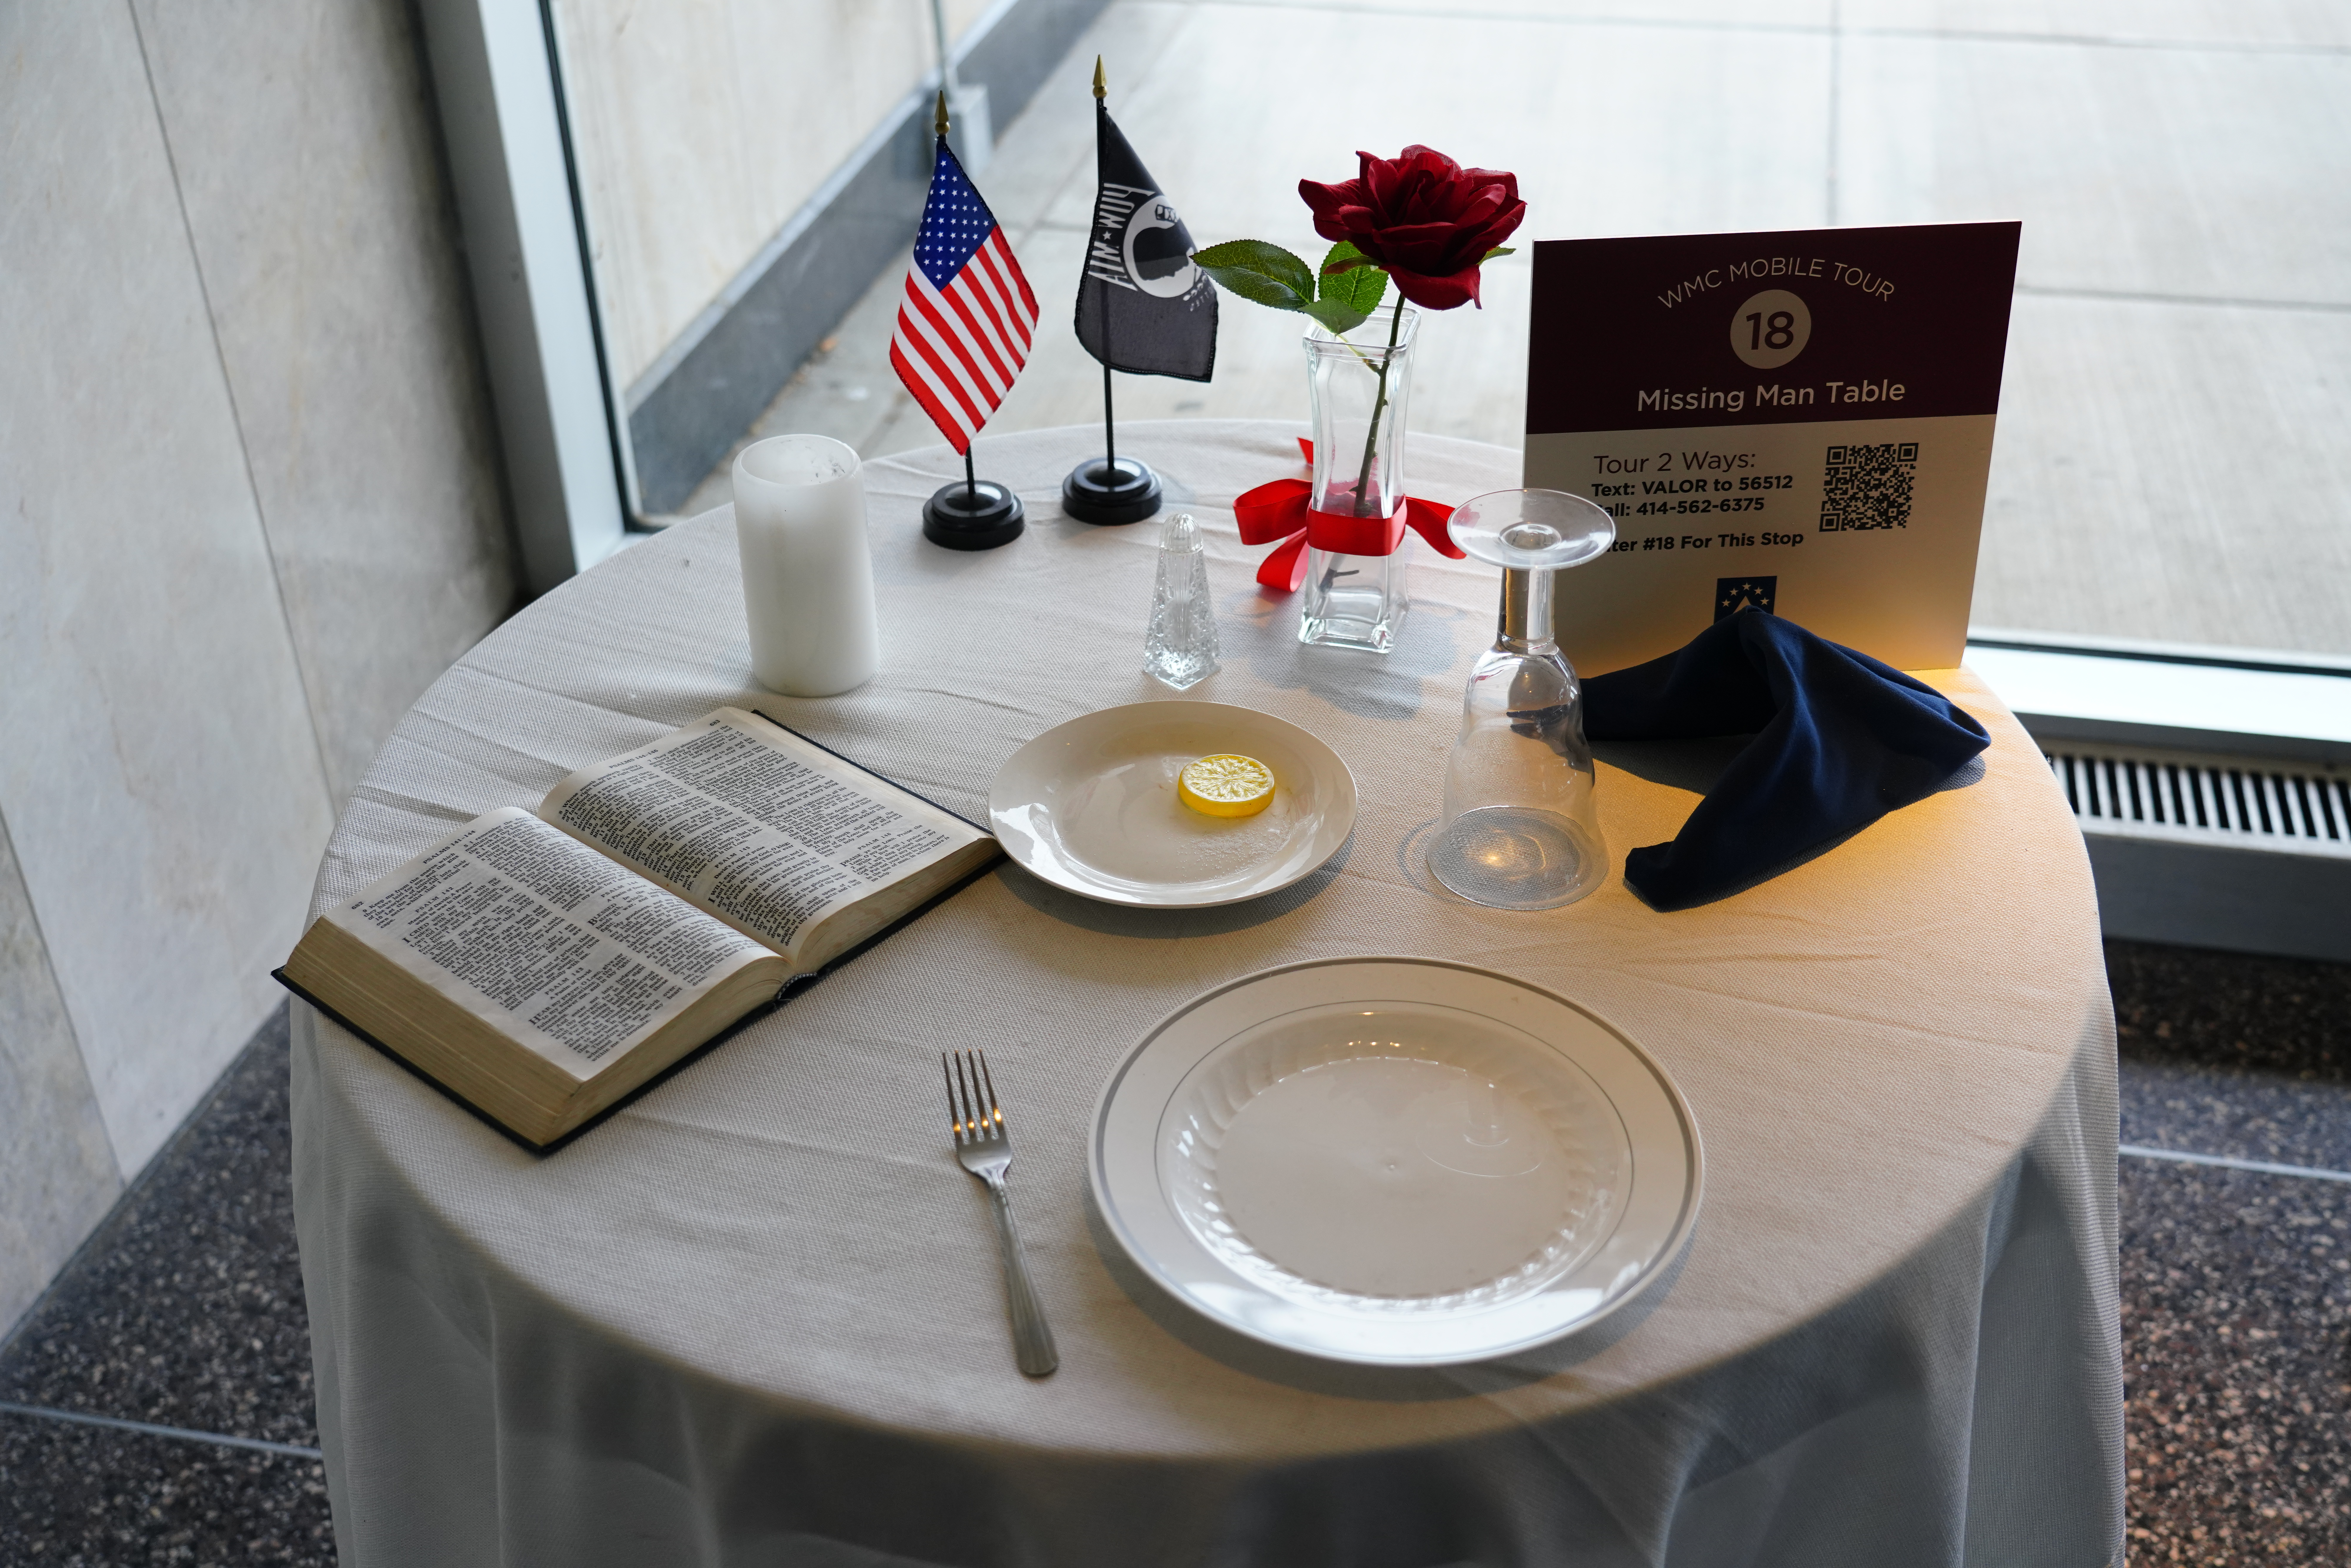 ‘The Bible Stays and our Veterans Win’; Lawsuit over POW/MIA Display at VA Hospital Settles